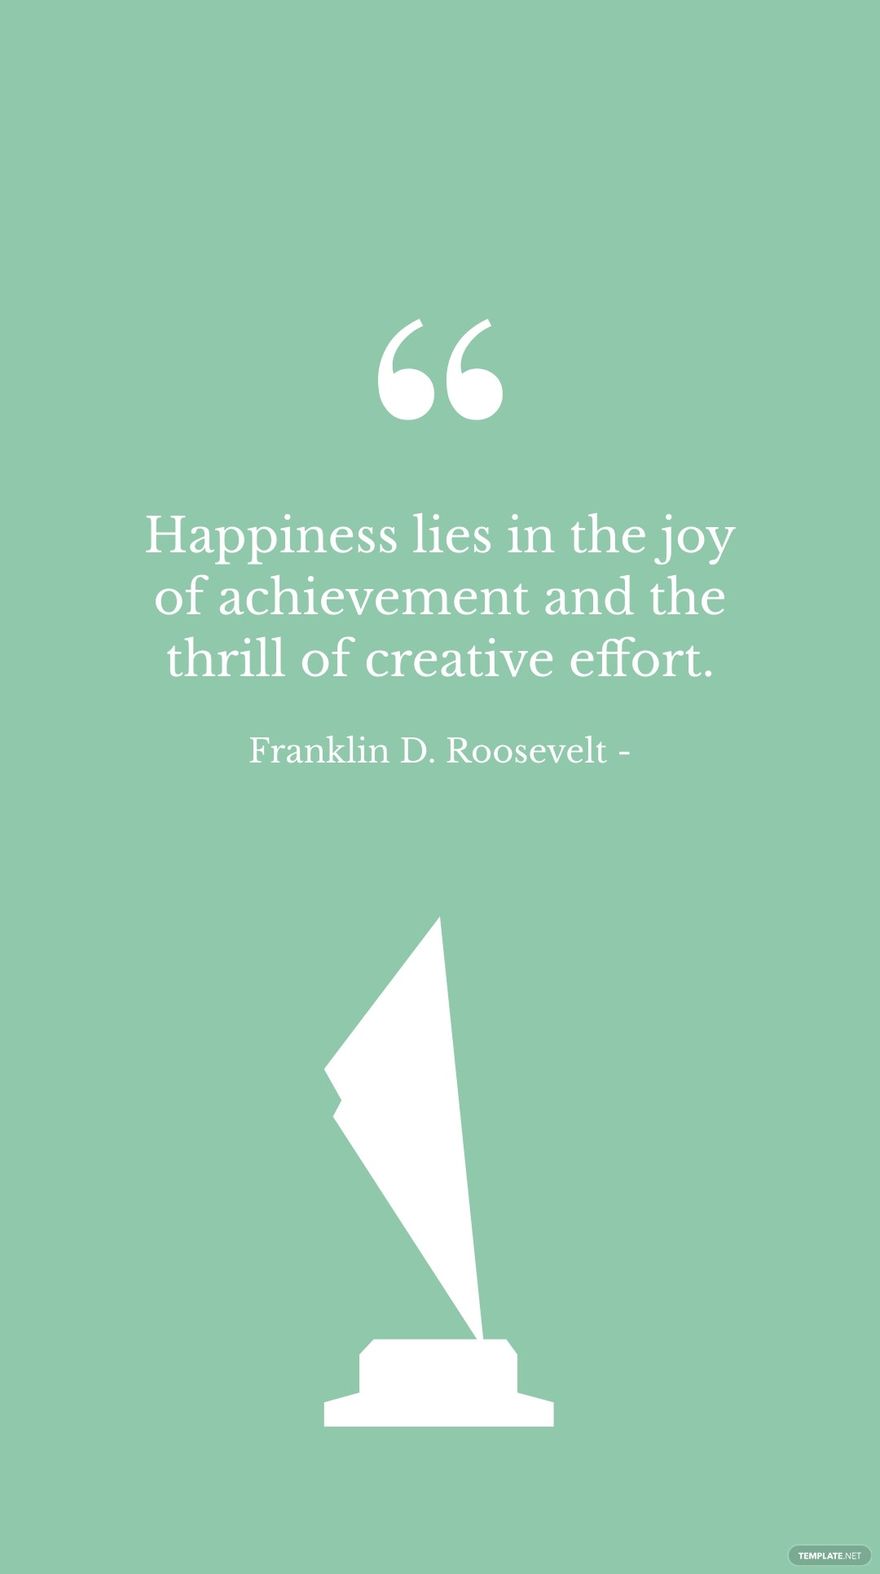 Free Franklin D. Roosevelt - Happiness lies in the joy of achievement and the thrill of creative effort. in JPG